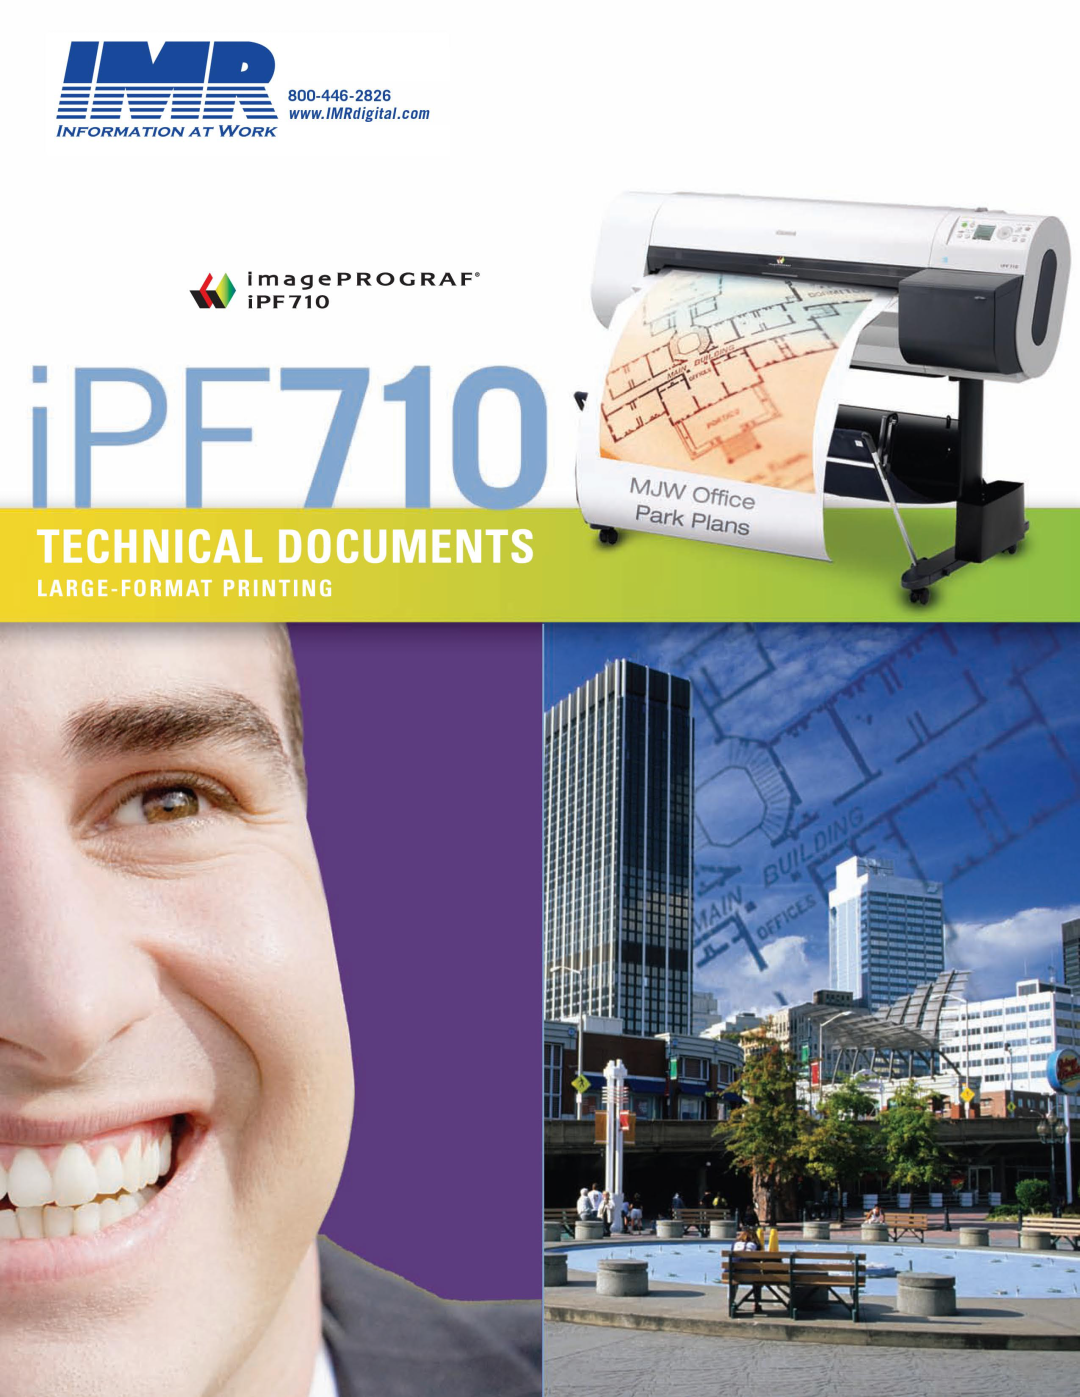 Canon IPF720, IPF605 manual iPF720/710/610/605/500, Technical Documents And General Use, Large-Format Printing Solutions 